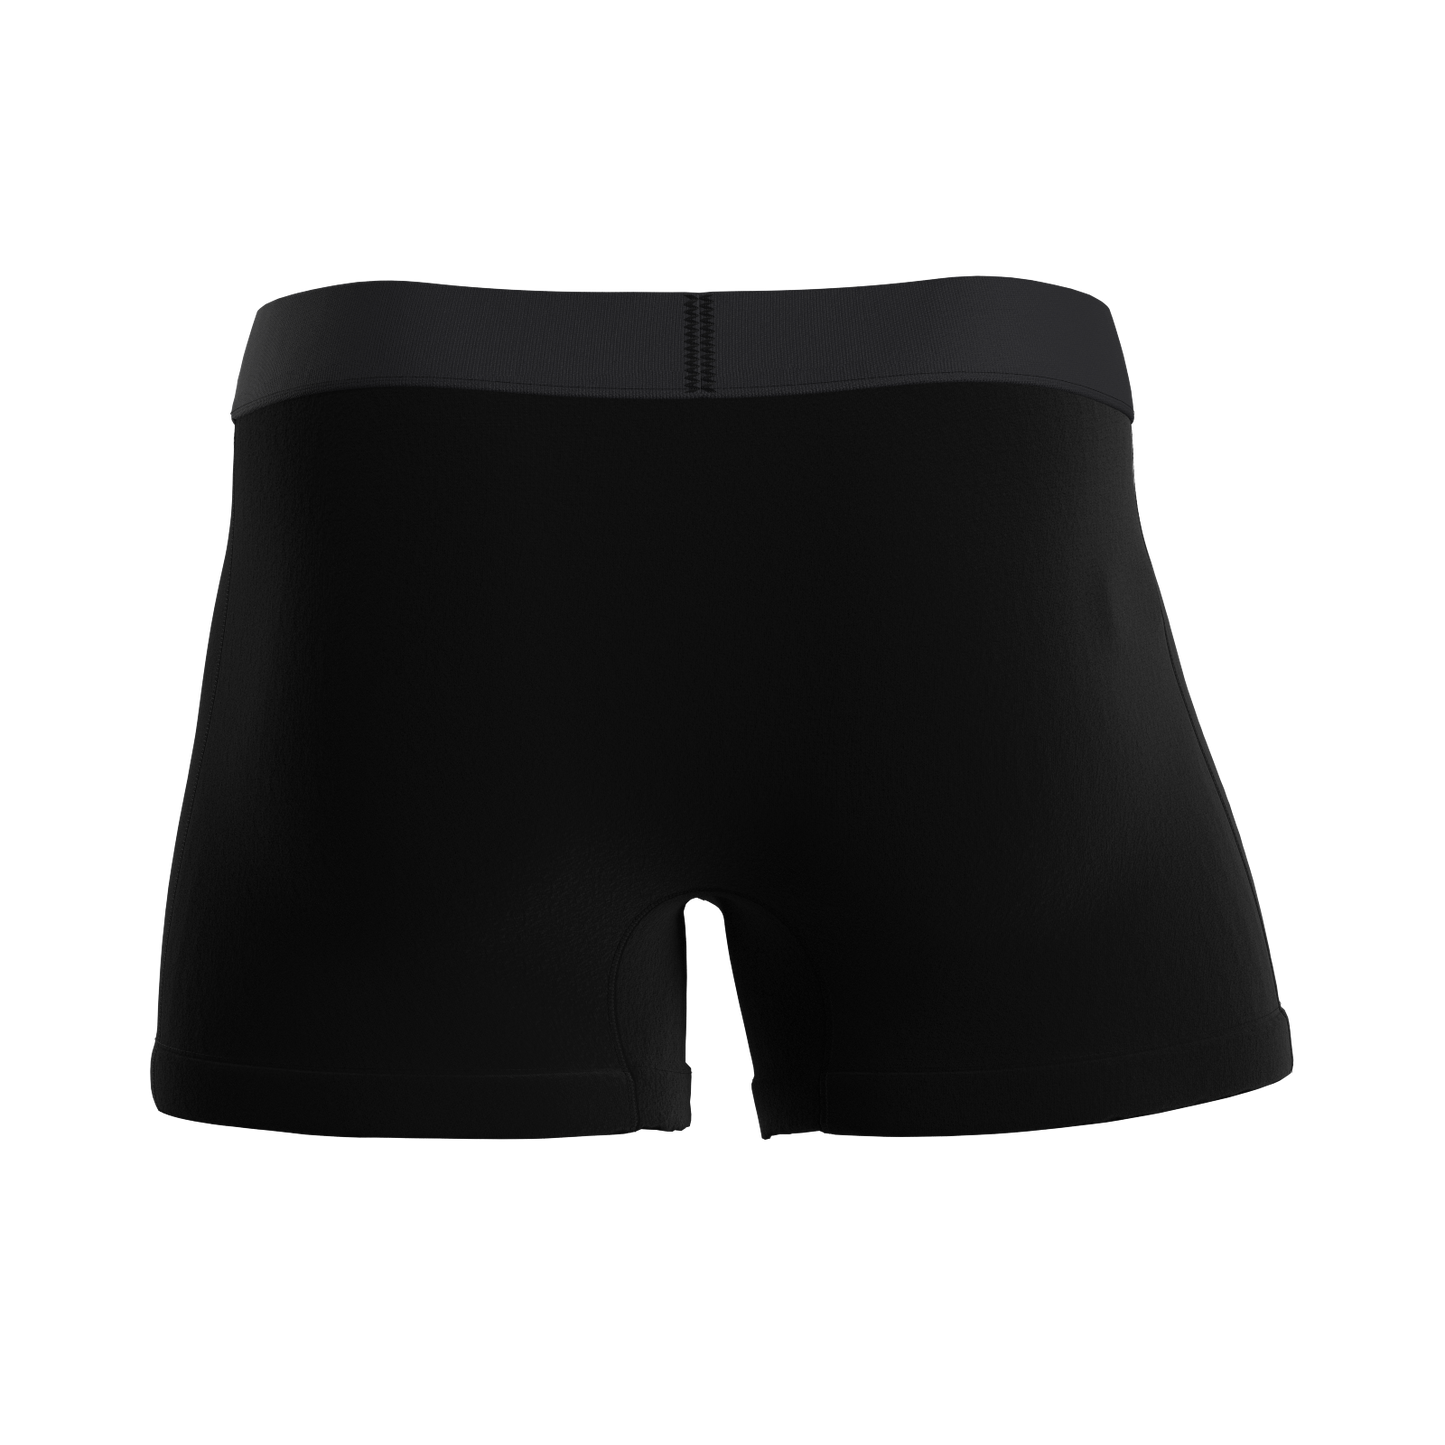 Black to Basics boxer briefs with Manley Barrier Technology that stops the pee spot. Feel manly in Manley.